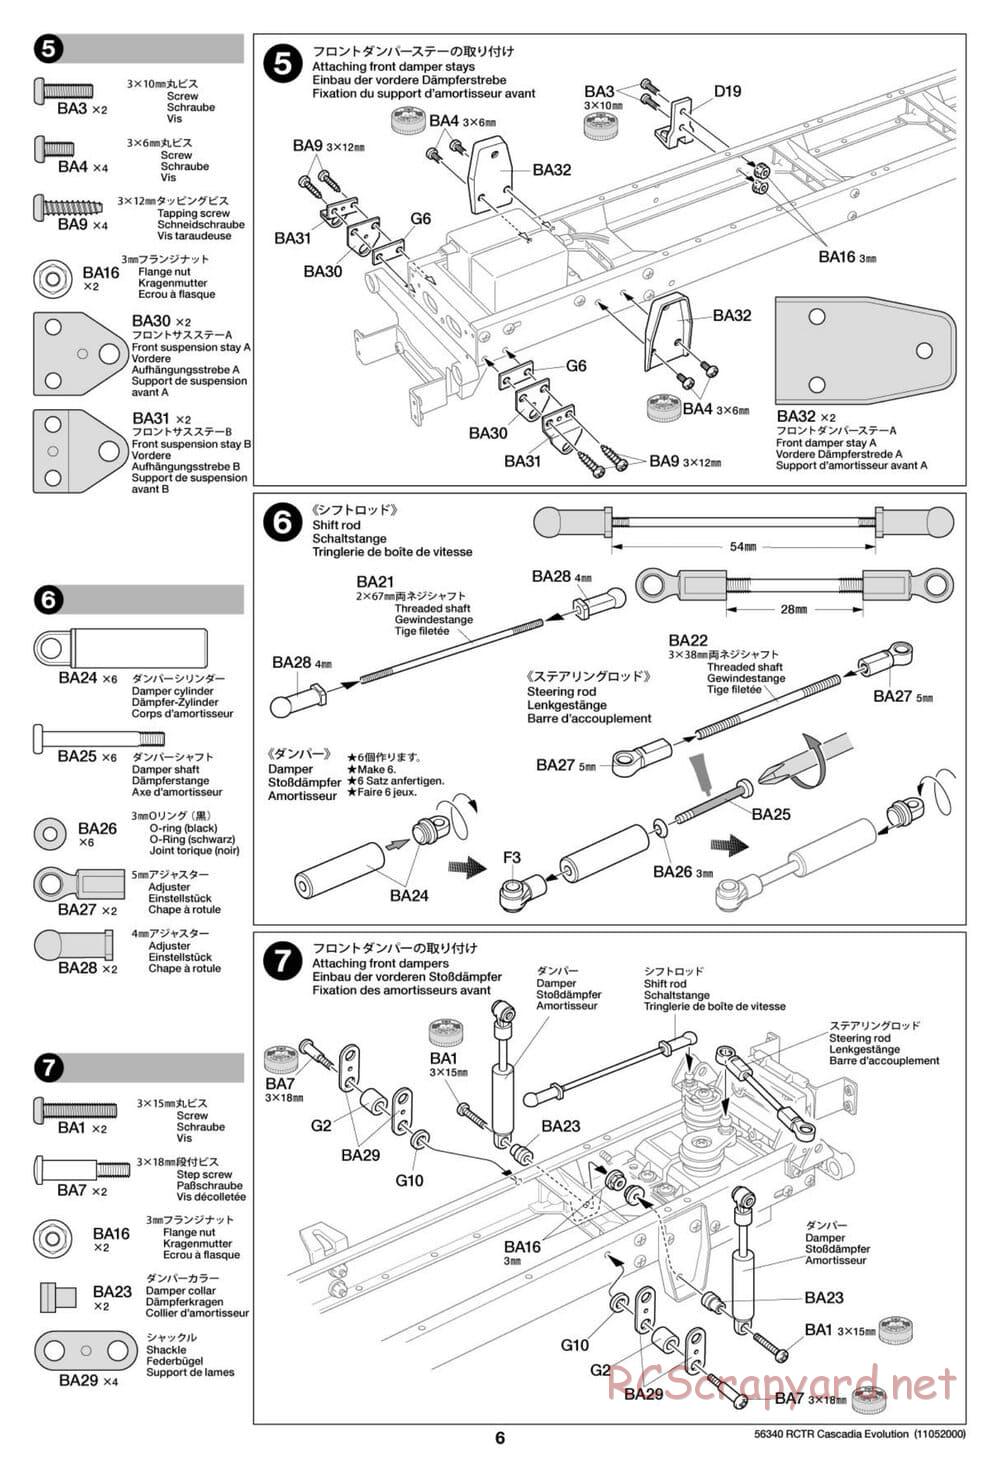 Tamiya - Freightliner Cascadia Evolution Tractor Truck Chassis - Manual - Page 6